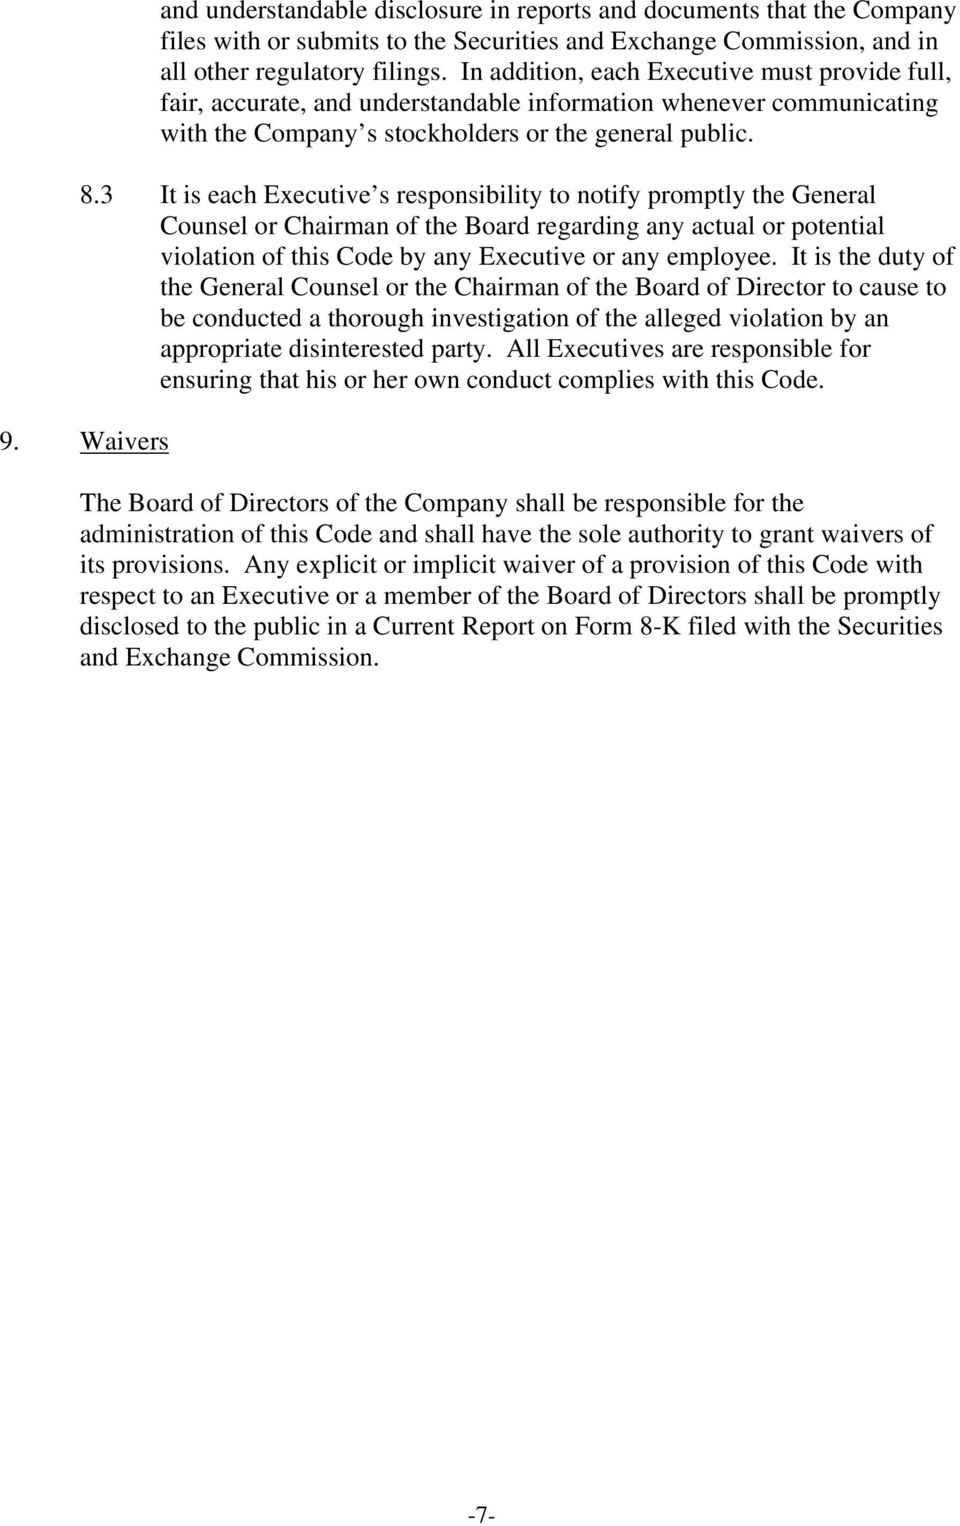 3 It is each Executive s responsibility to notify promptly the General Counsel or Chairman of the Board regarding any actual or potential violation of this Code by any Executive or any employee.